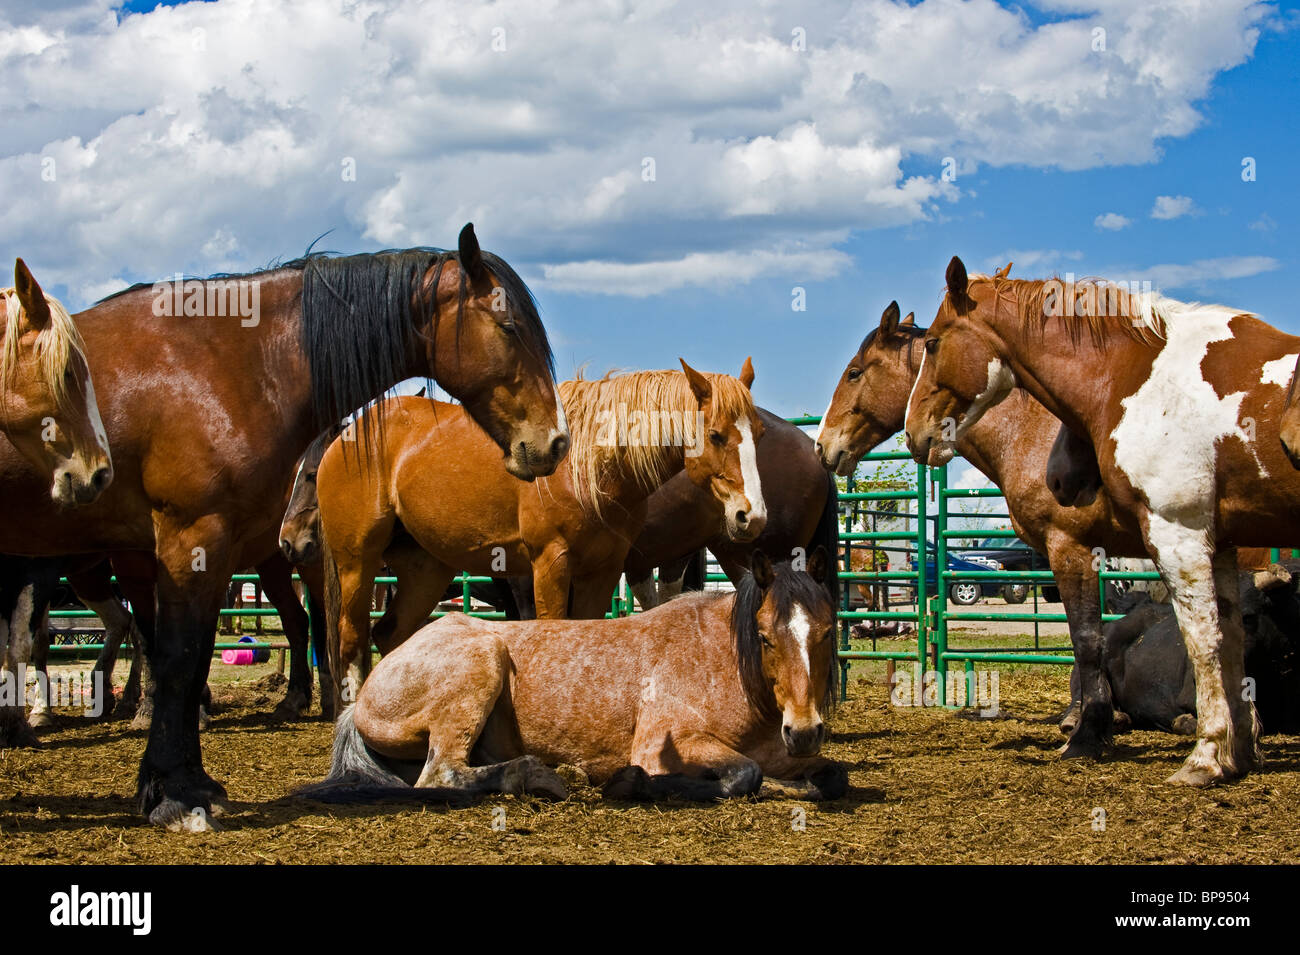 A herd of domestic horses resting Stock Photo